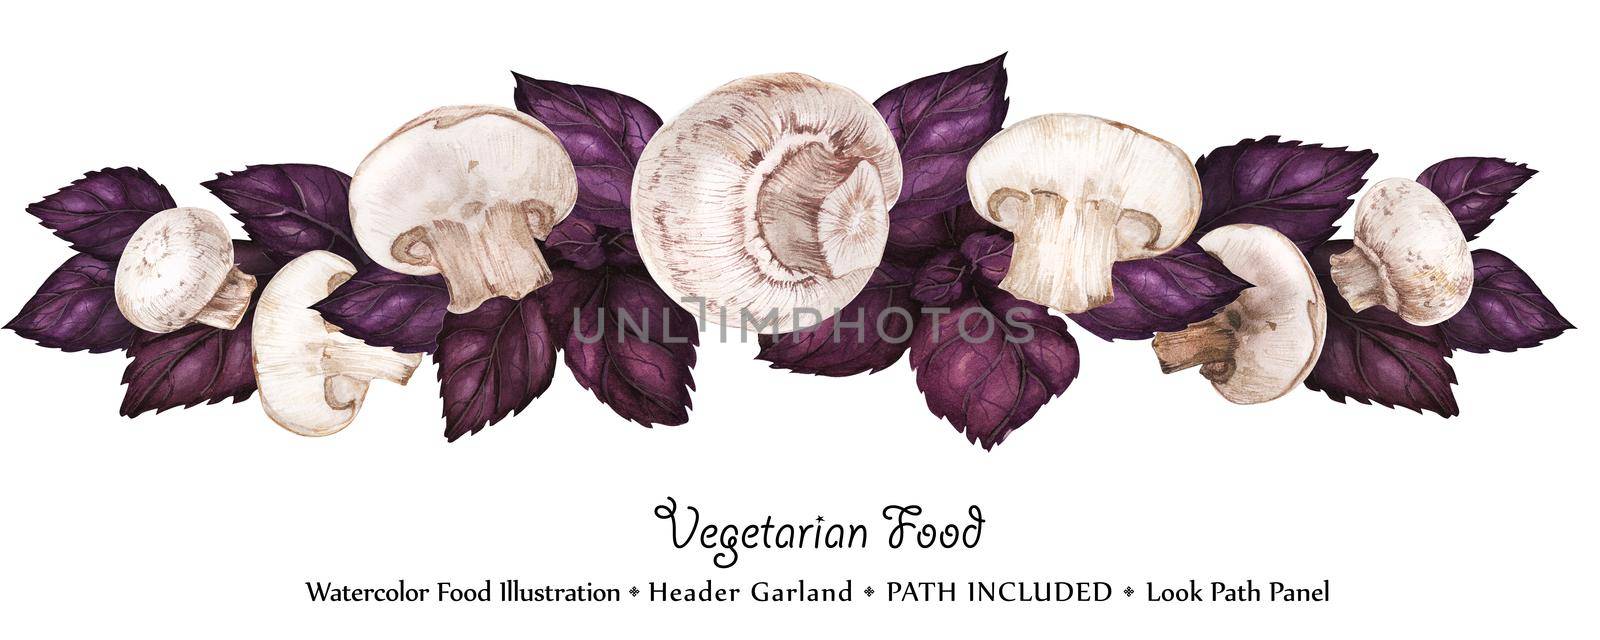 Watercolor vegan headline garland by freshness purple basil leaves and champignons. Isolated, clipping path included, vegan design